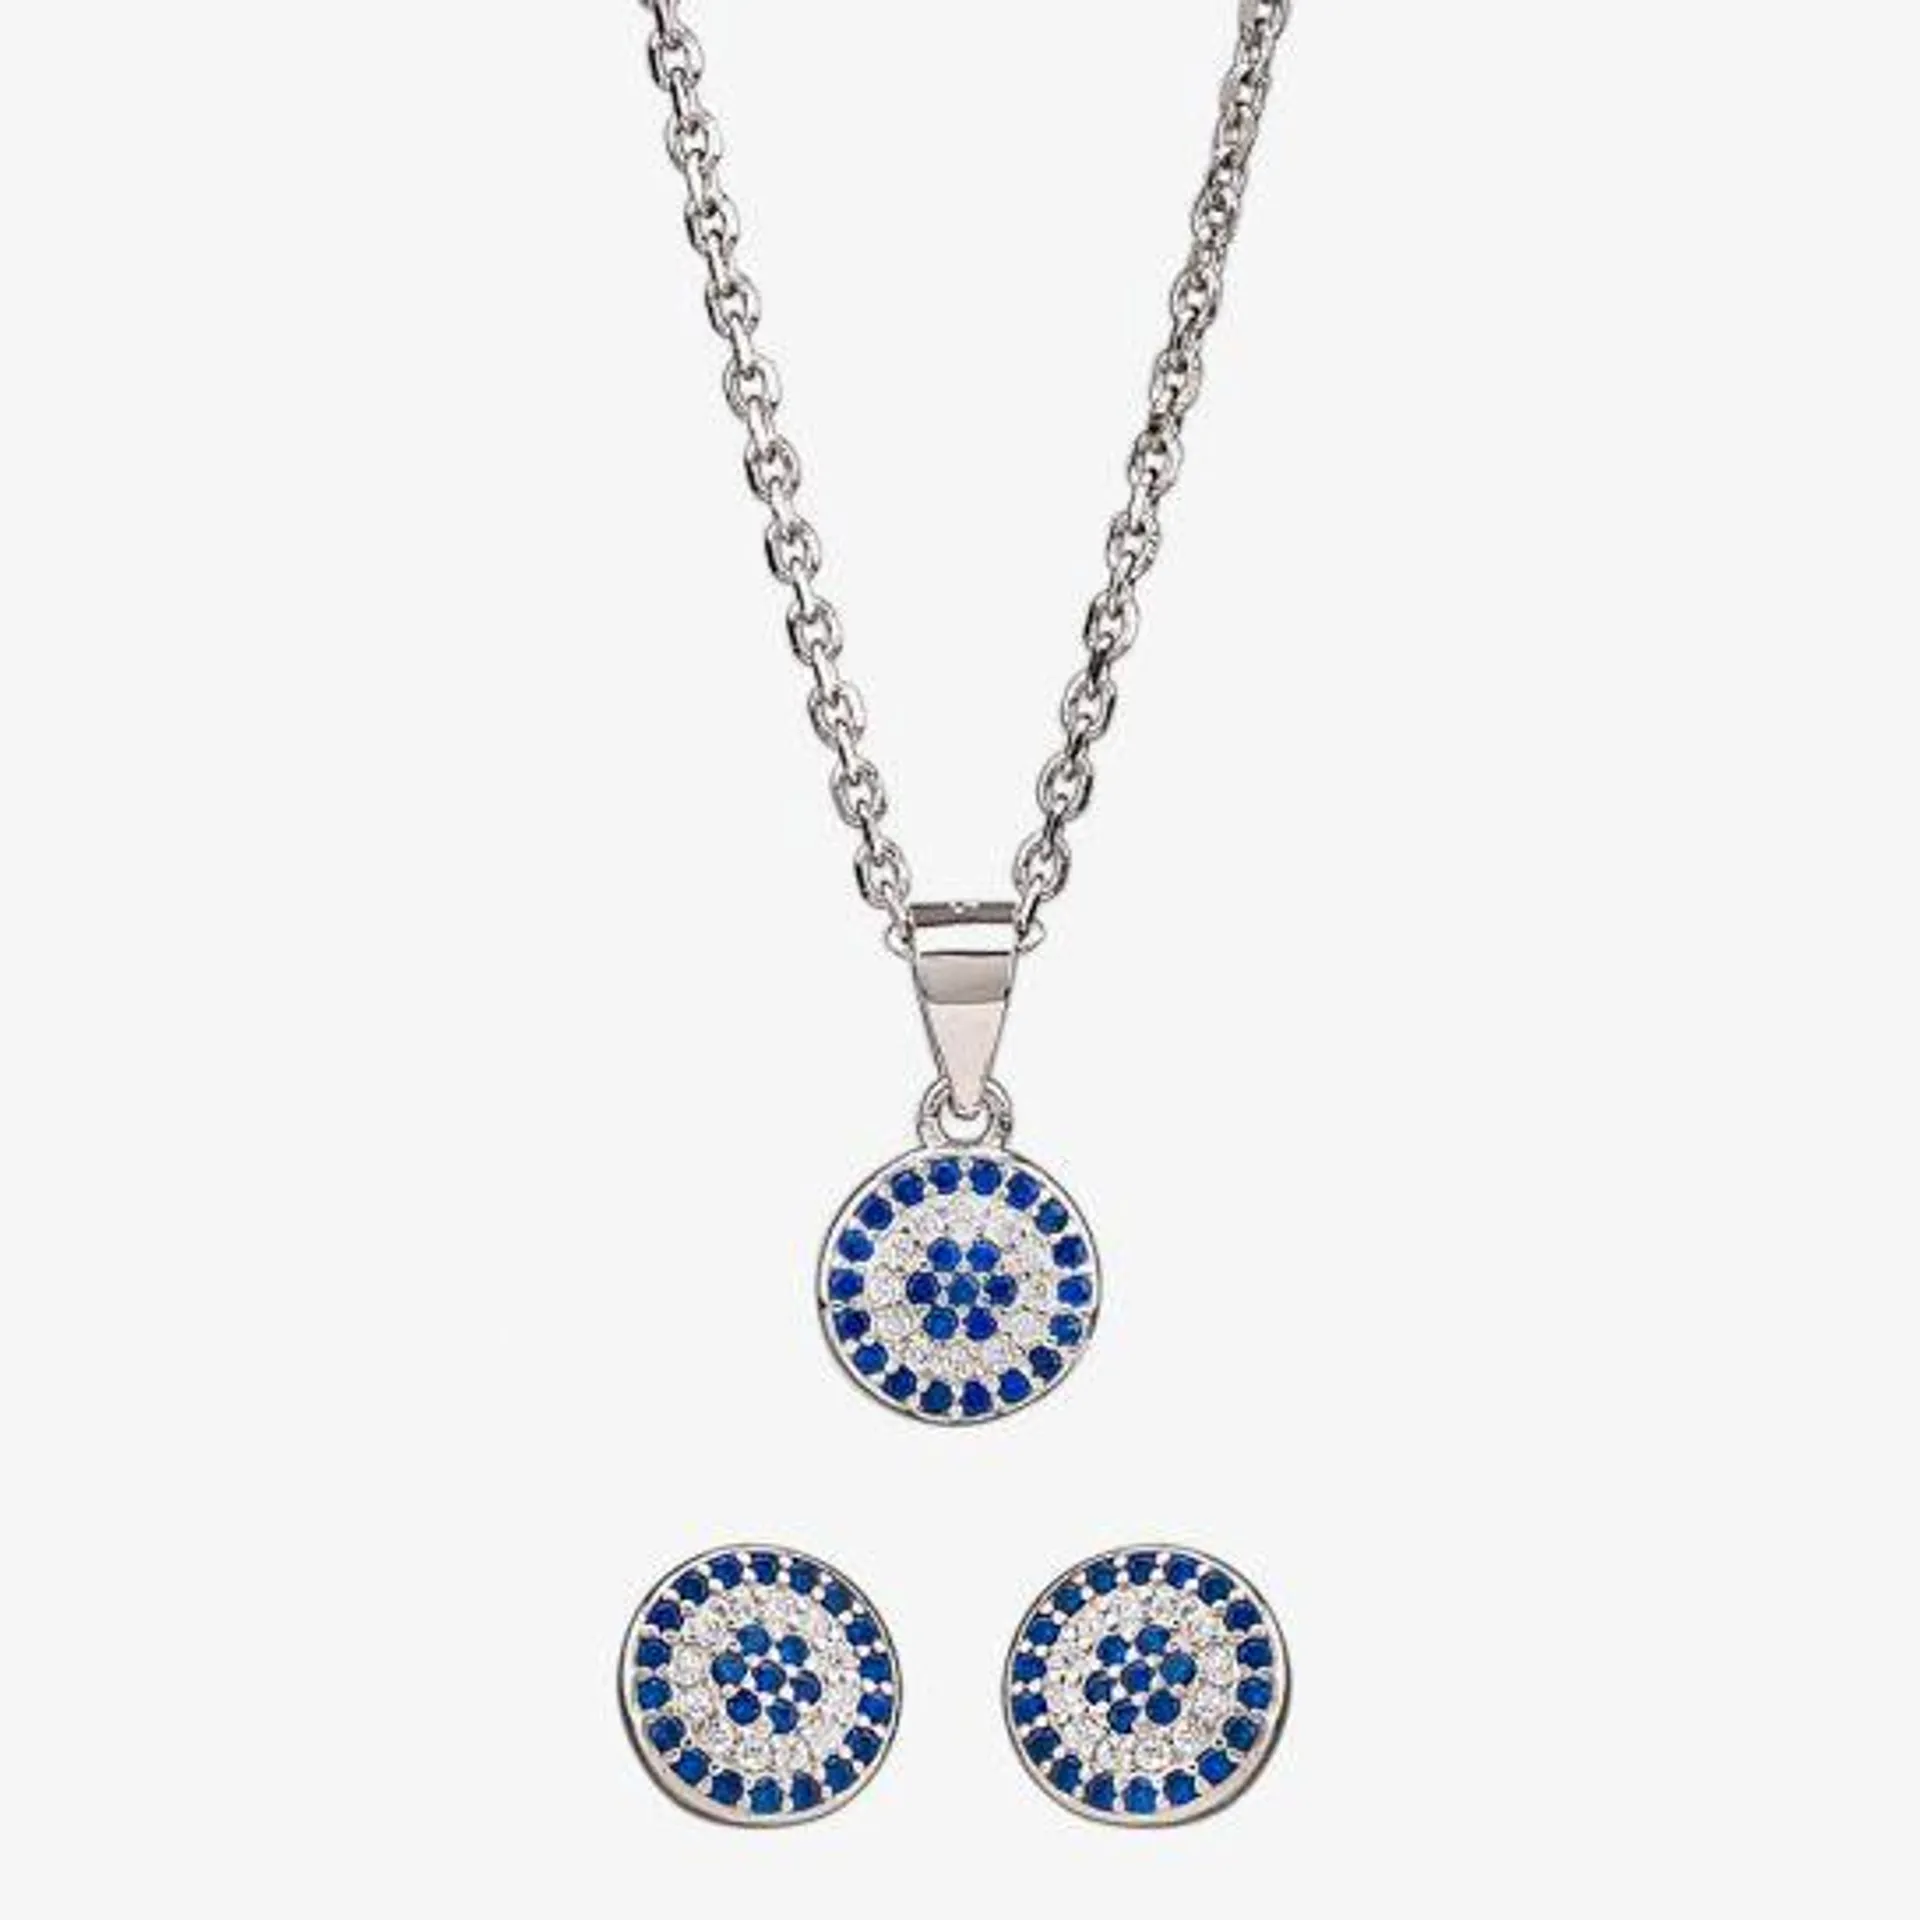 Silver Blue and White Cubic Zirconia Round Pendant and Earring Set SET9729